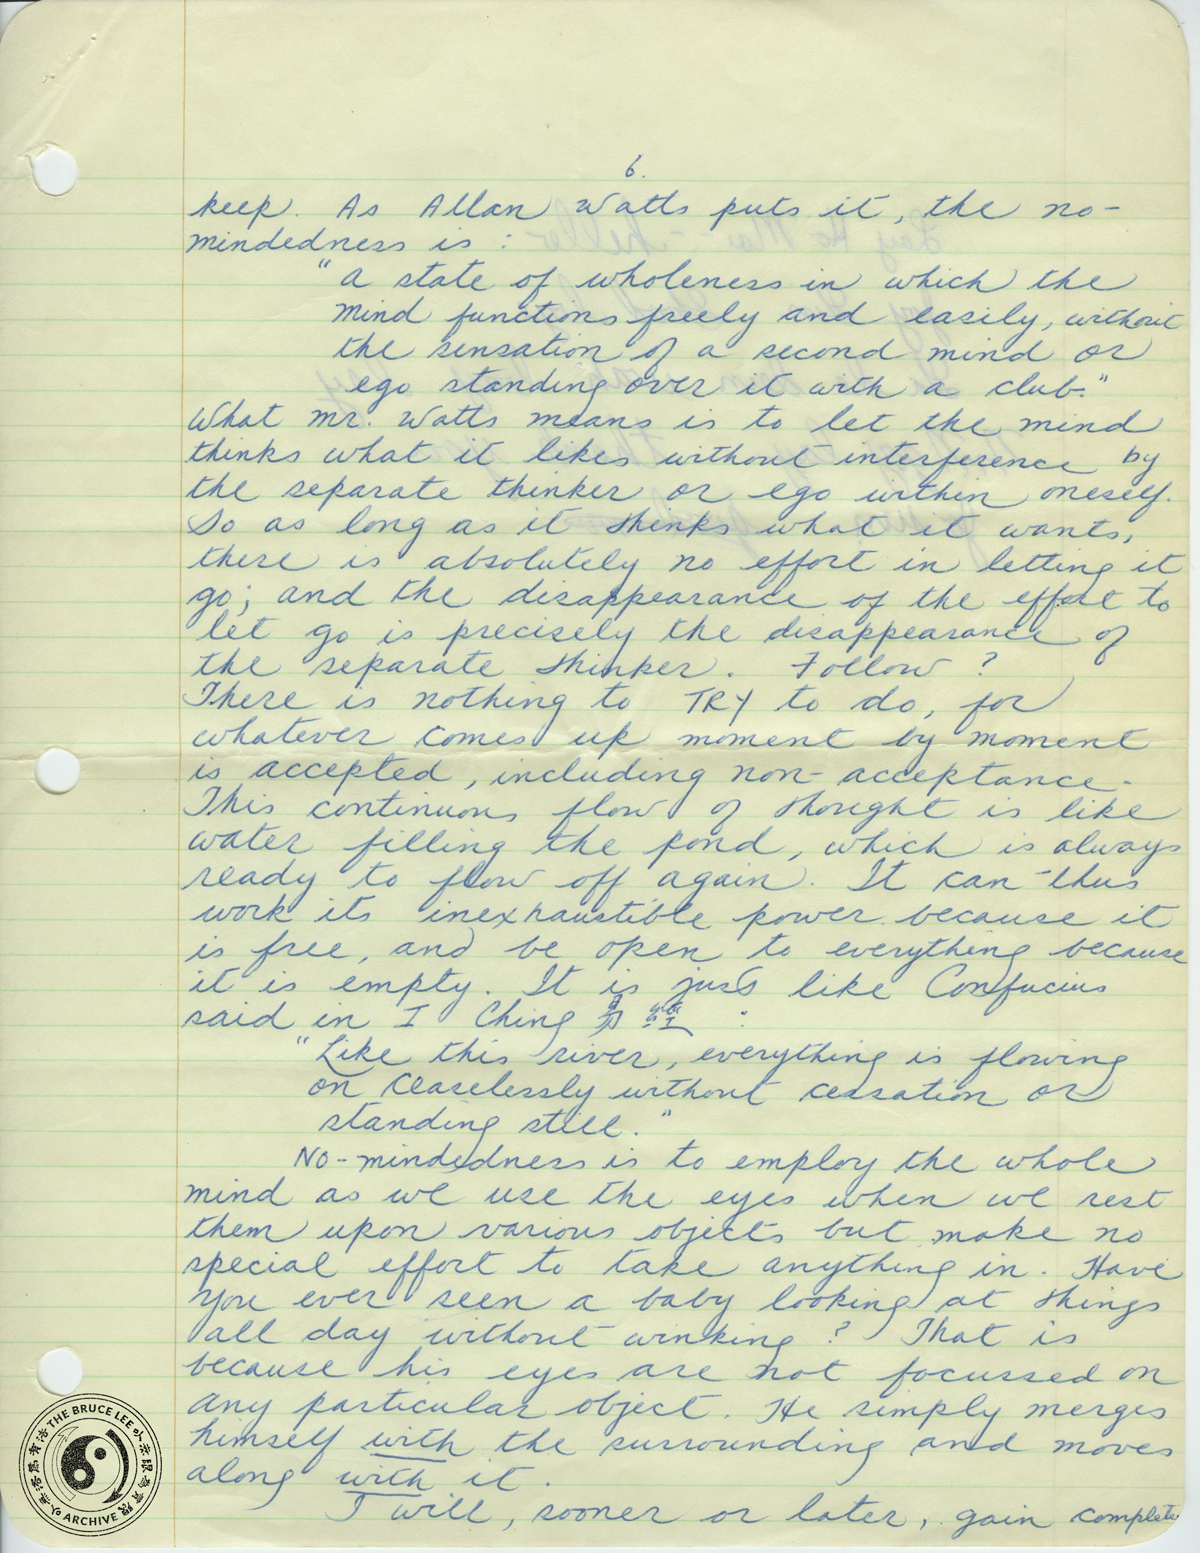 Letter-to-Pearl-draft-pg.6-archive.jpg